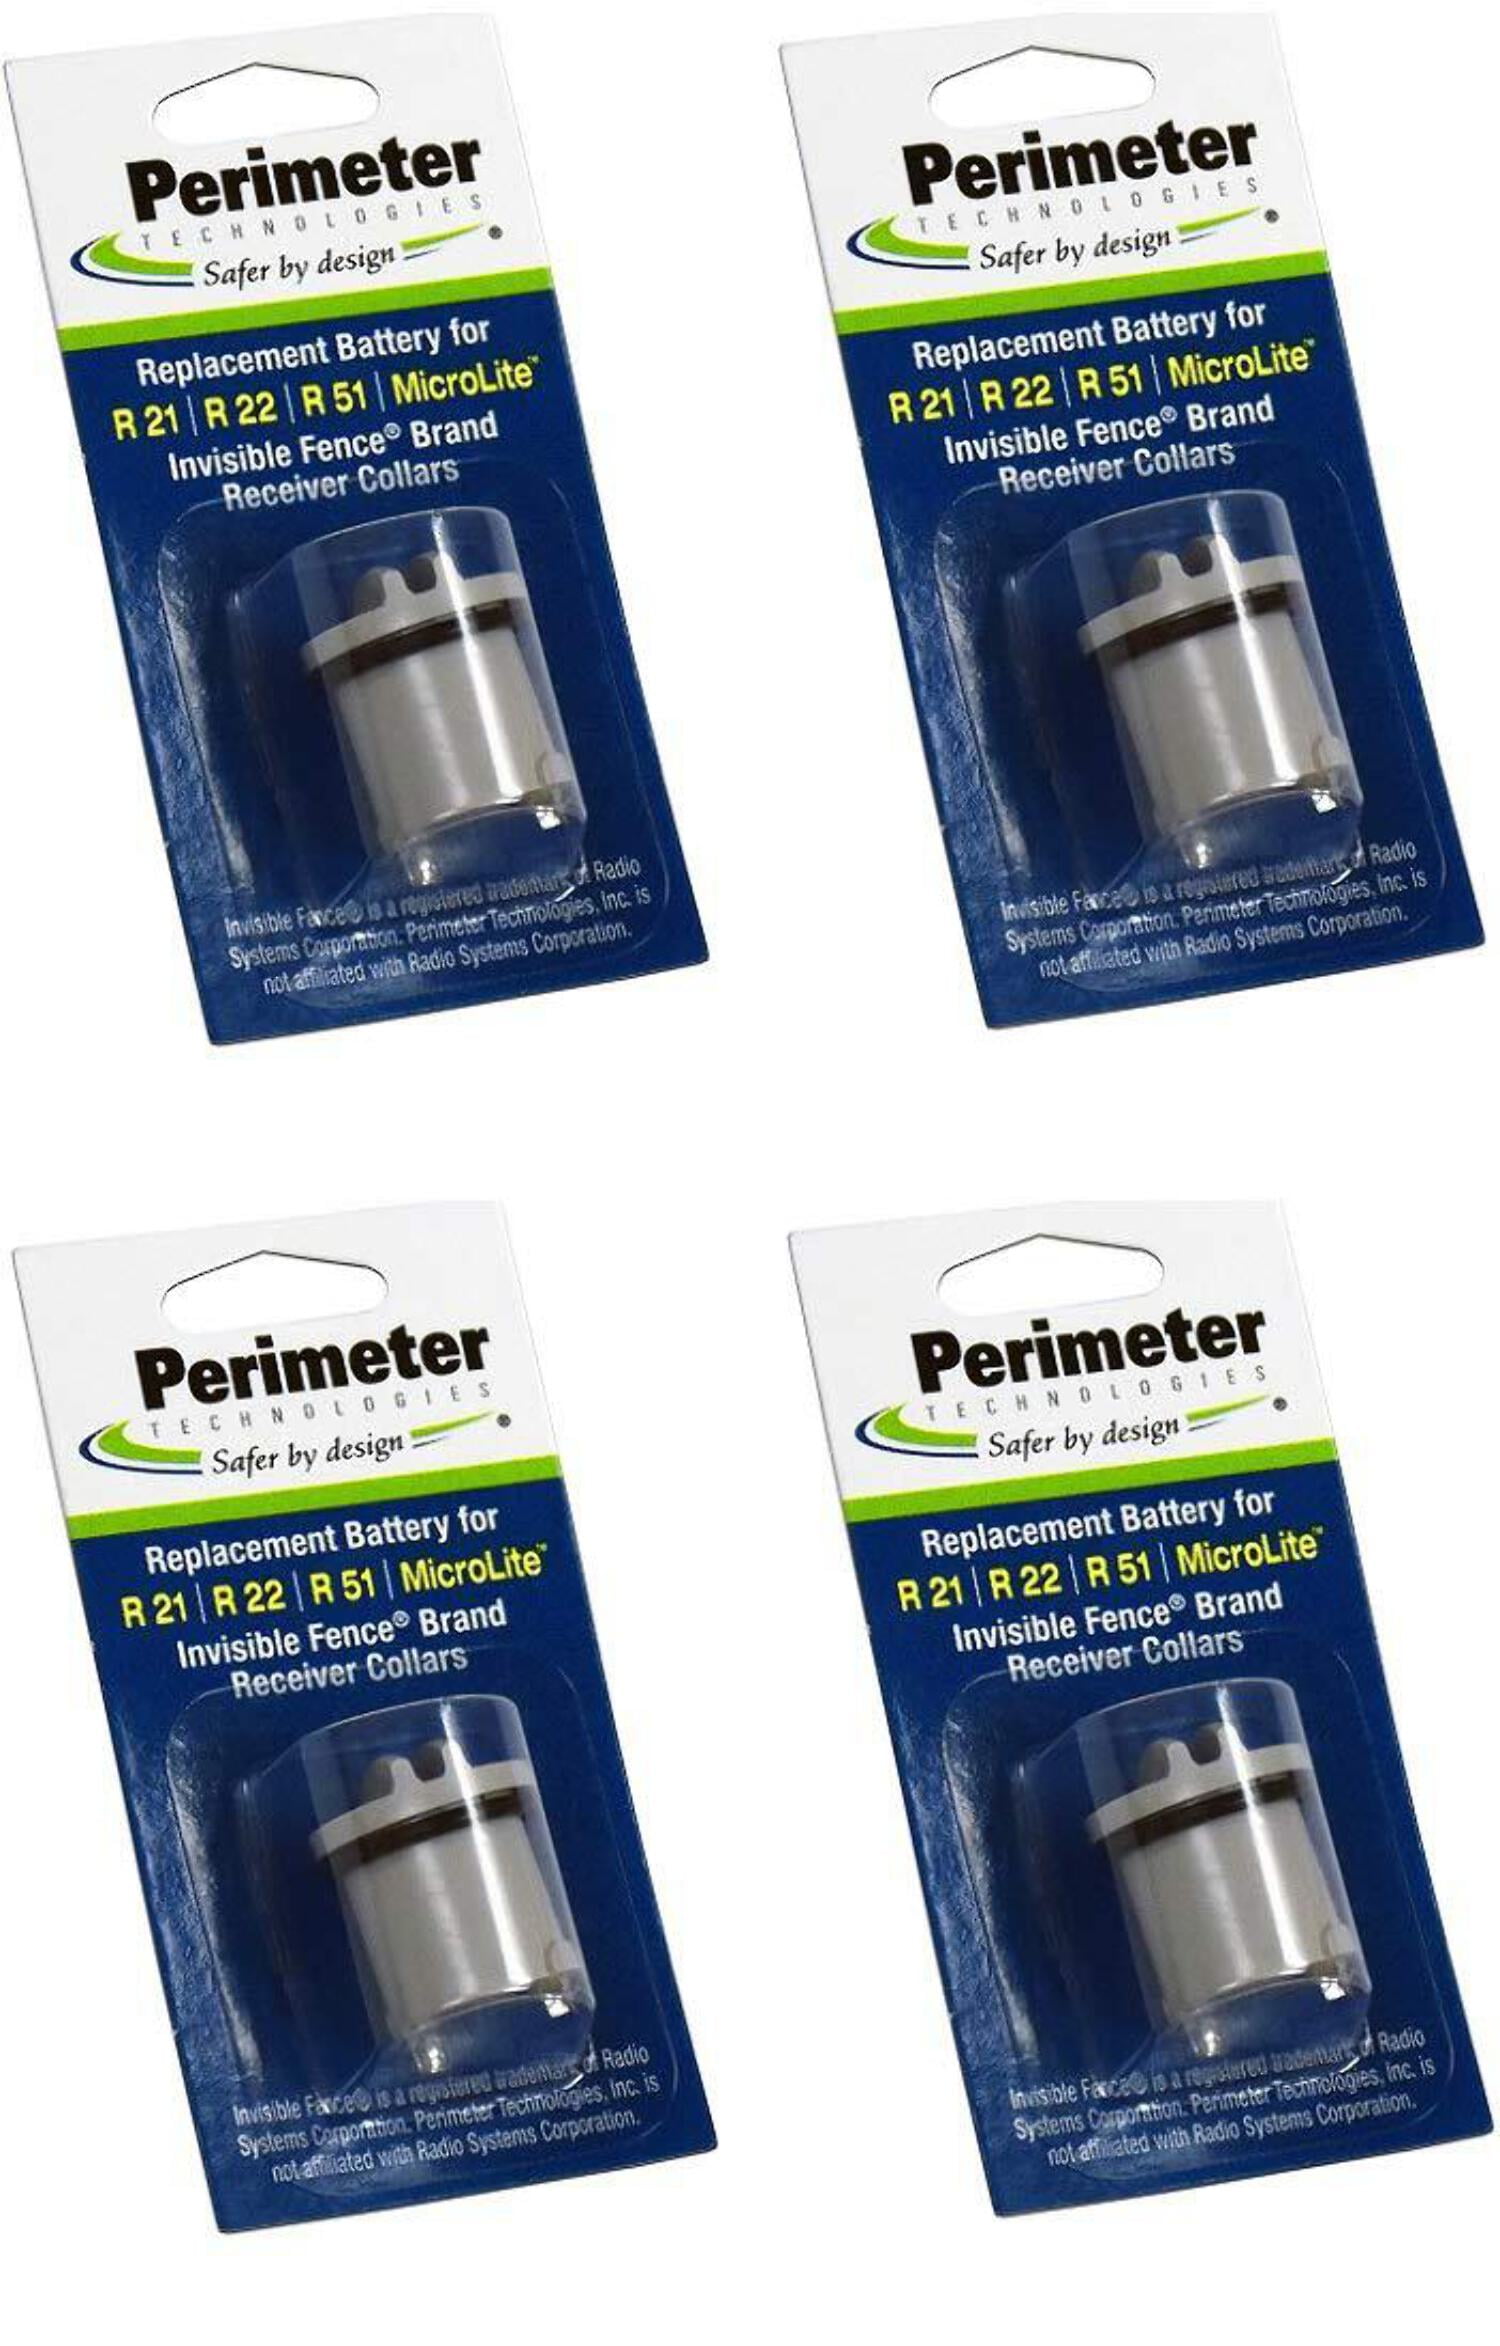  Perimeter Technologies Four Pack Dog Fence Batteries For  Invisible Fence R21 Or R51 Receiver Collars